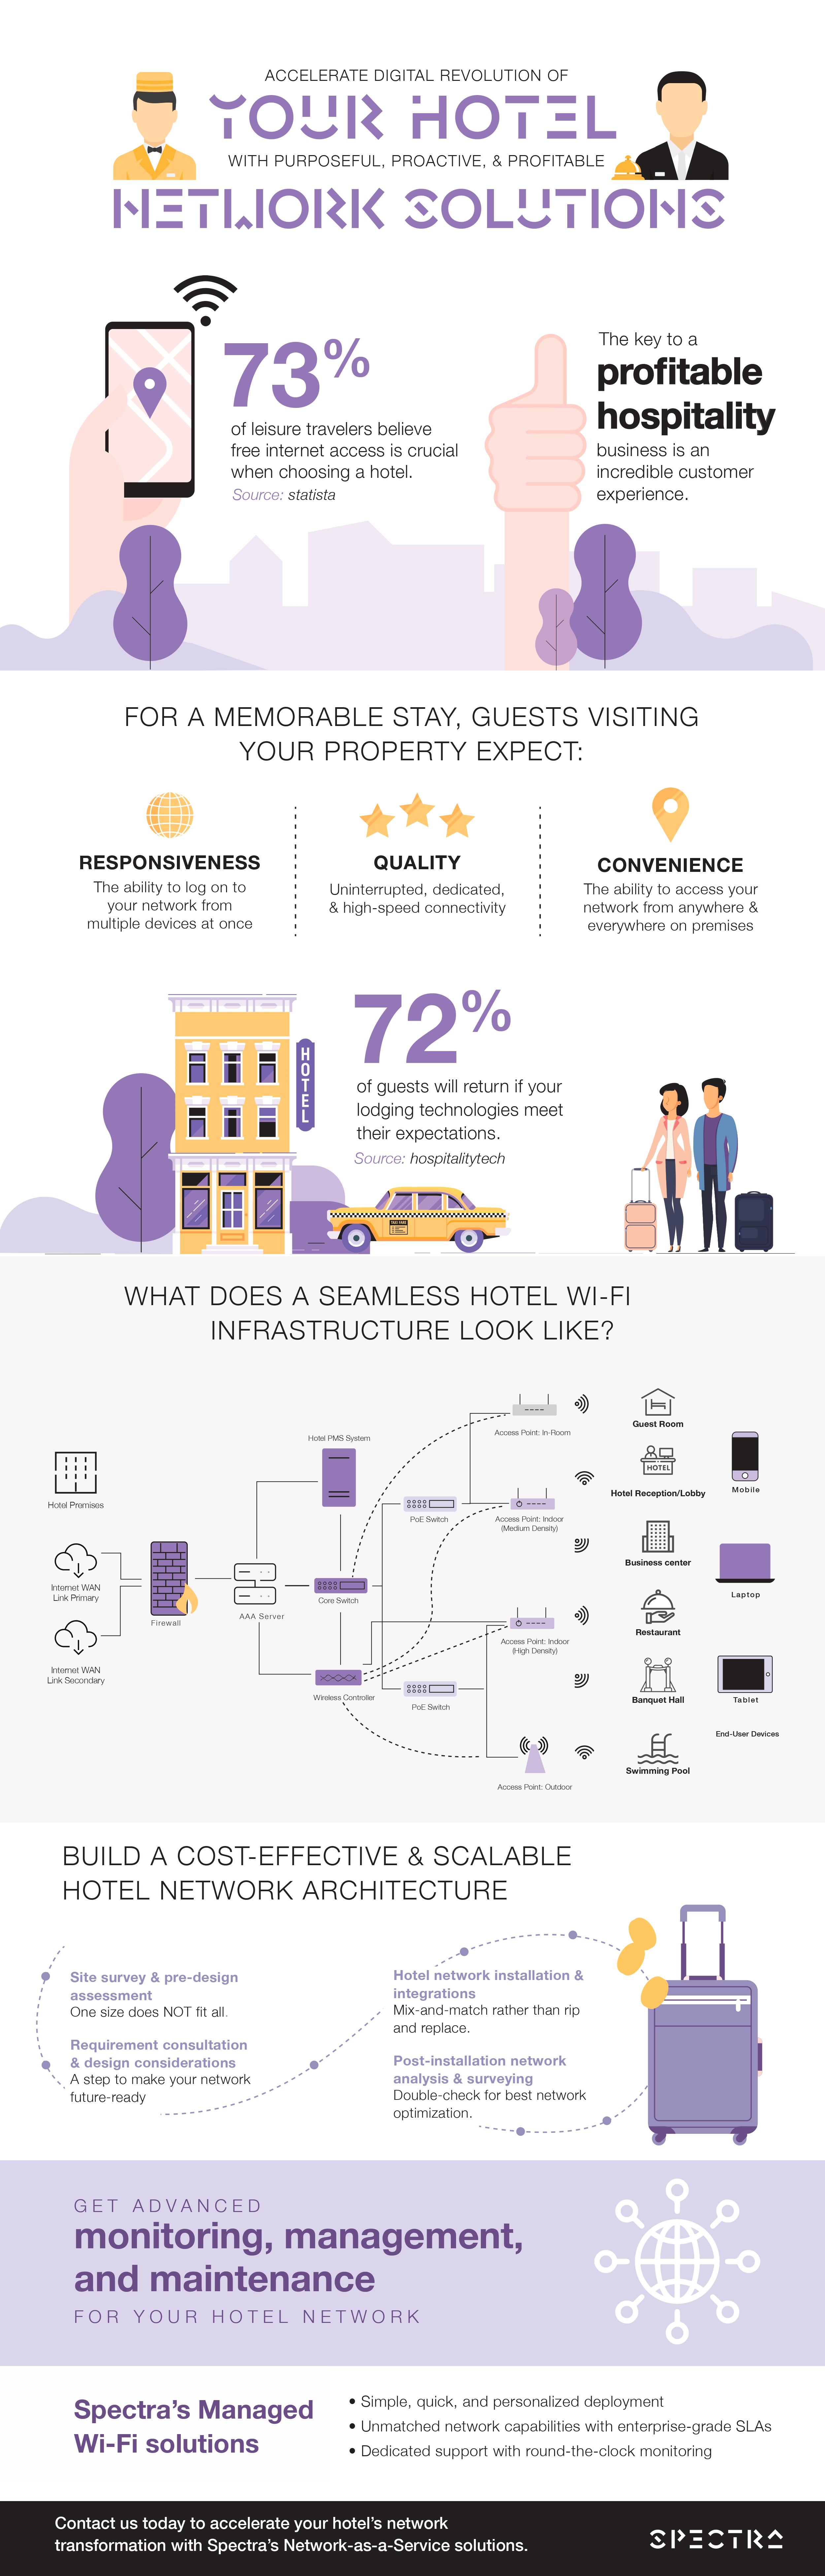 Accelerate digital revolution of your hotel - Spectra